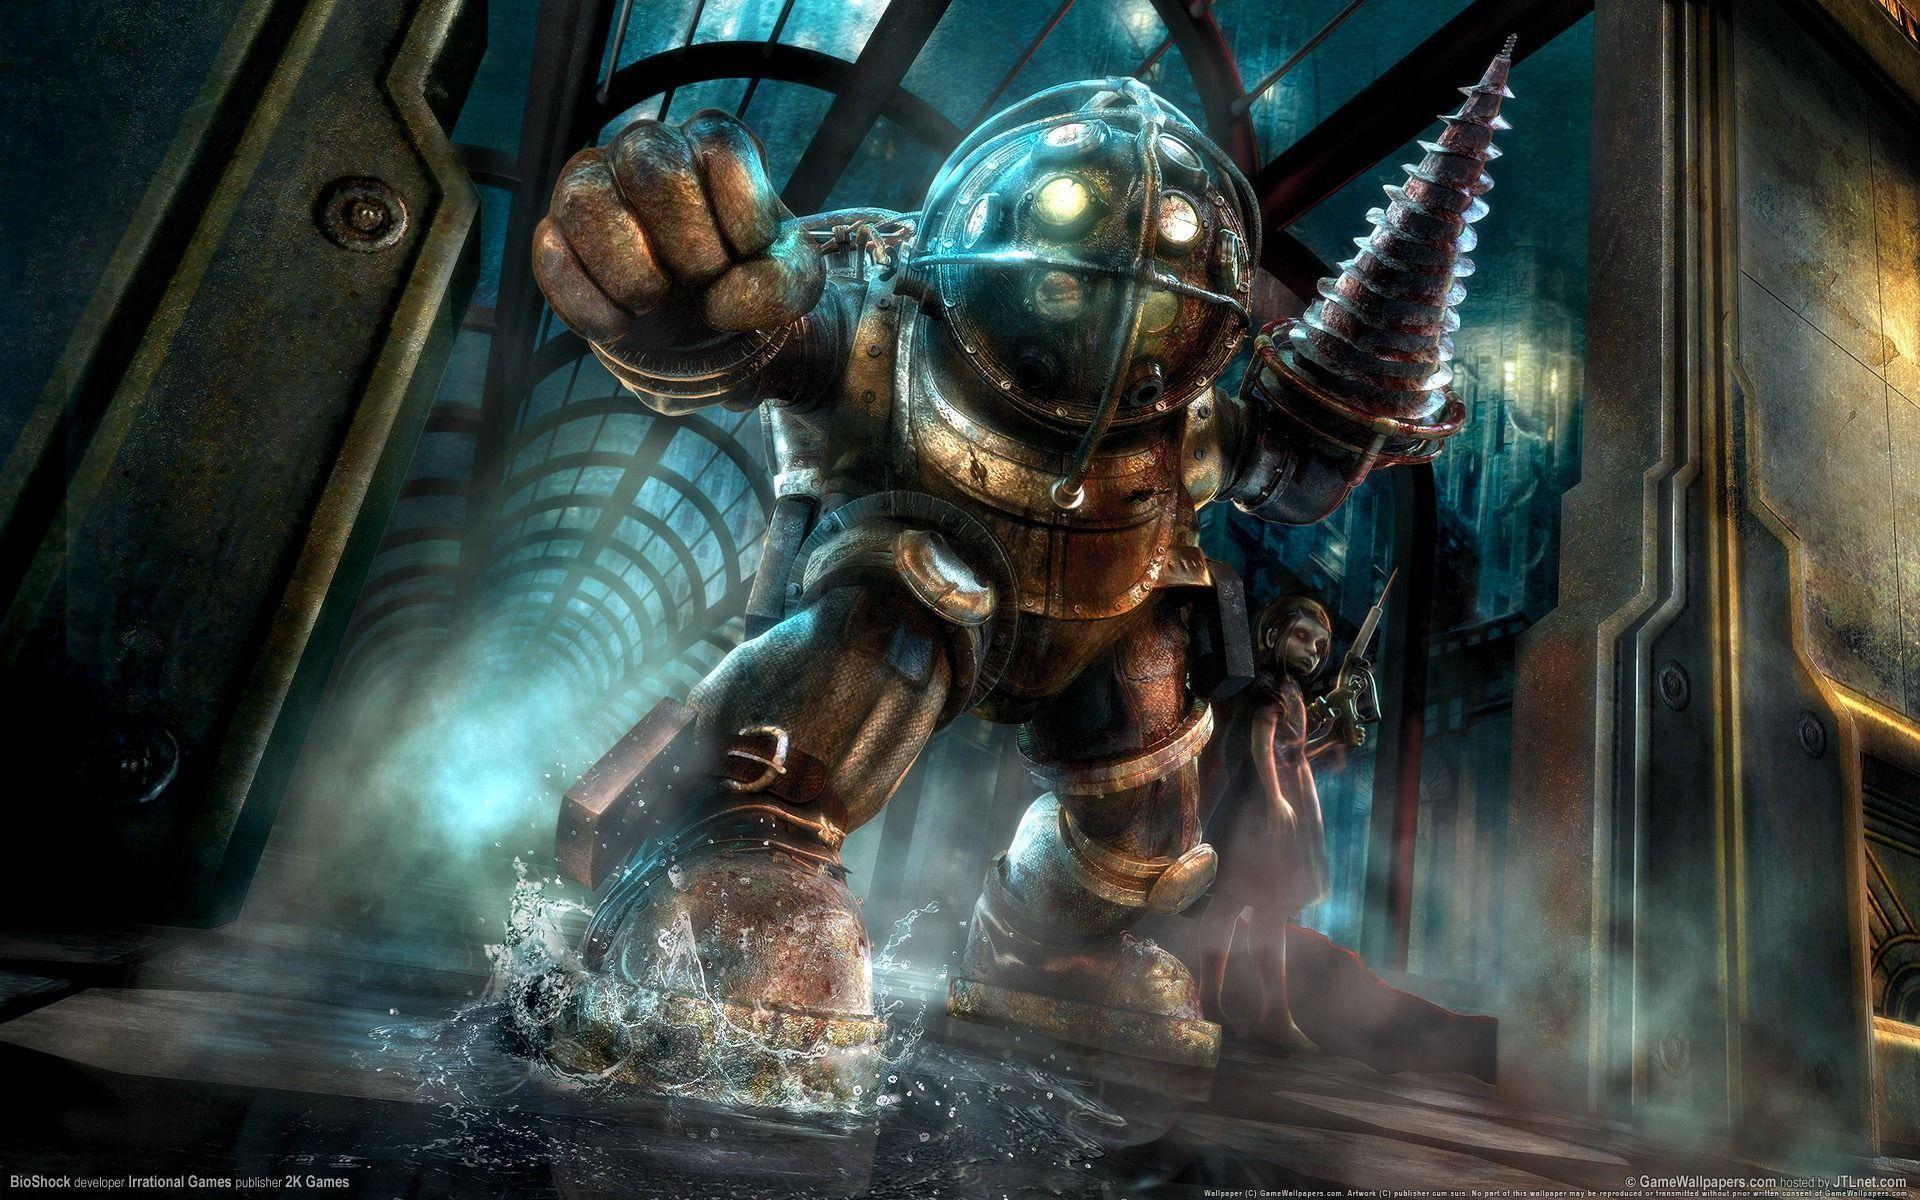 2K confirms a new BioShock game is in development